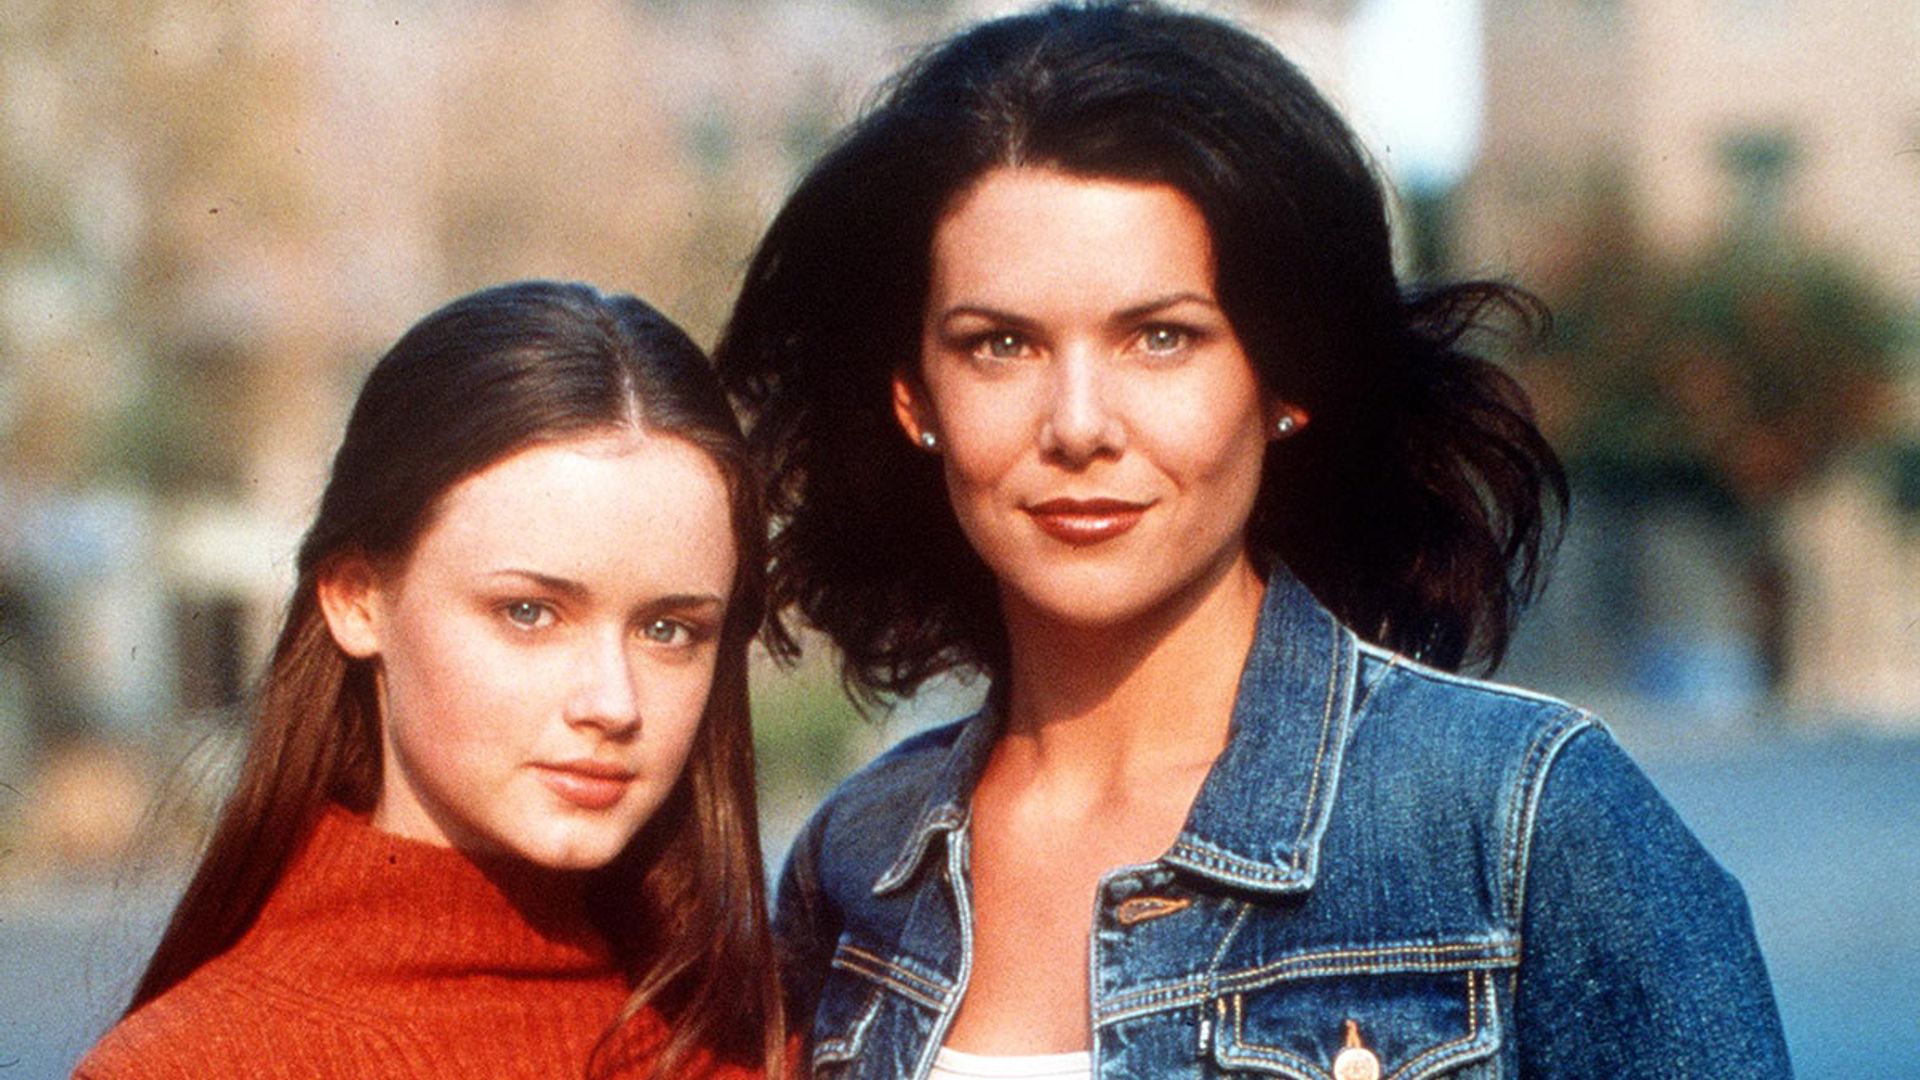 Gilmore Girls”: The perfect autumn watch | The Cor Chronicle